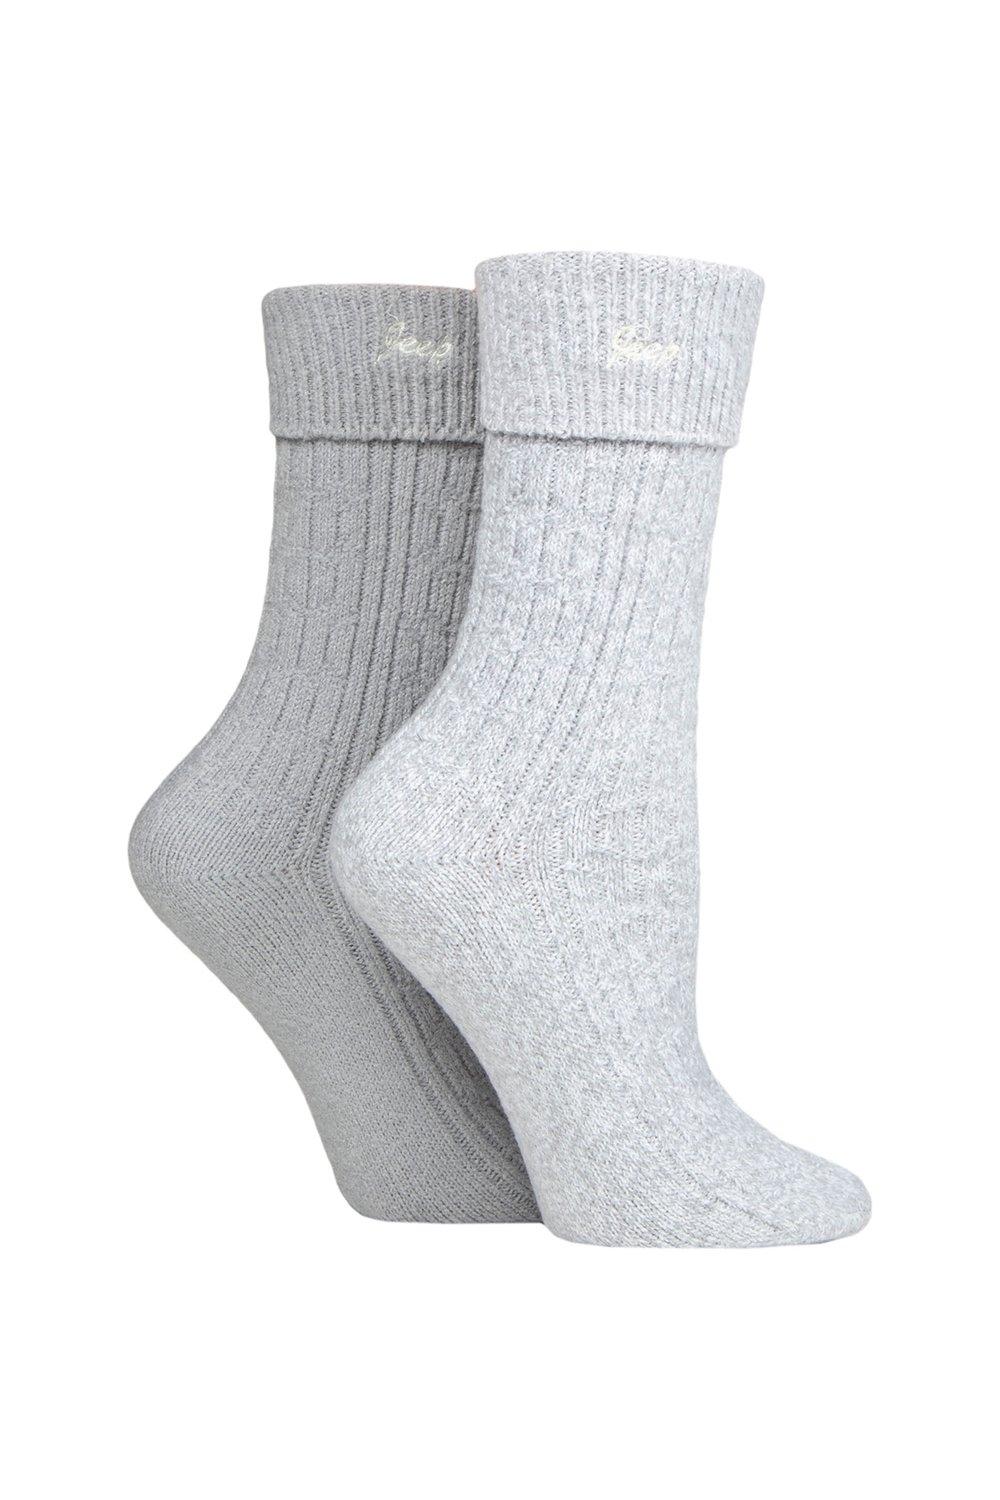 2 Pair Super Soft Turn Over Top Polyester Boot Socks